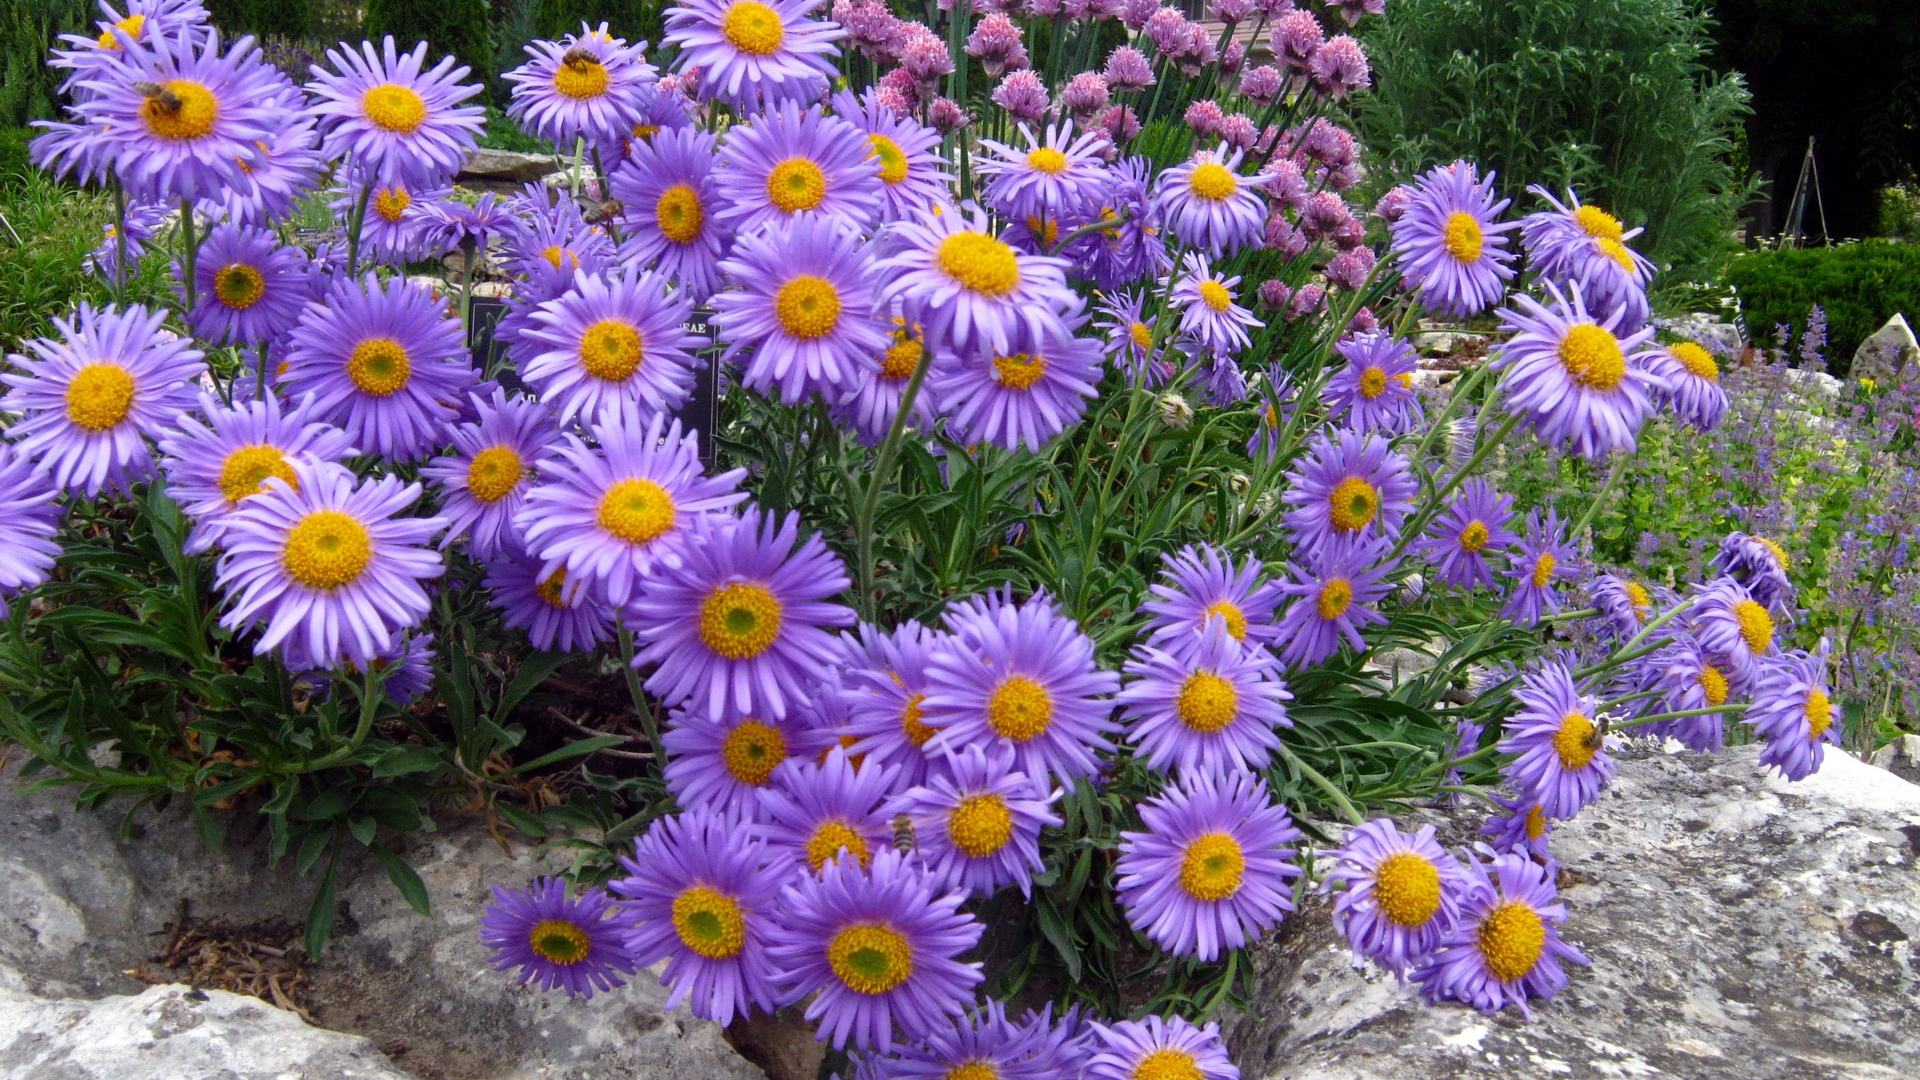 Download Wallpaper 1920x1080 asters, flowers, stone, park ...